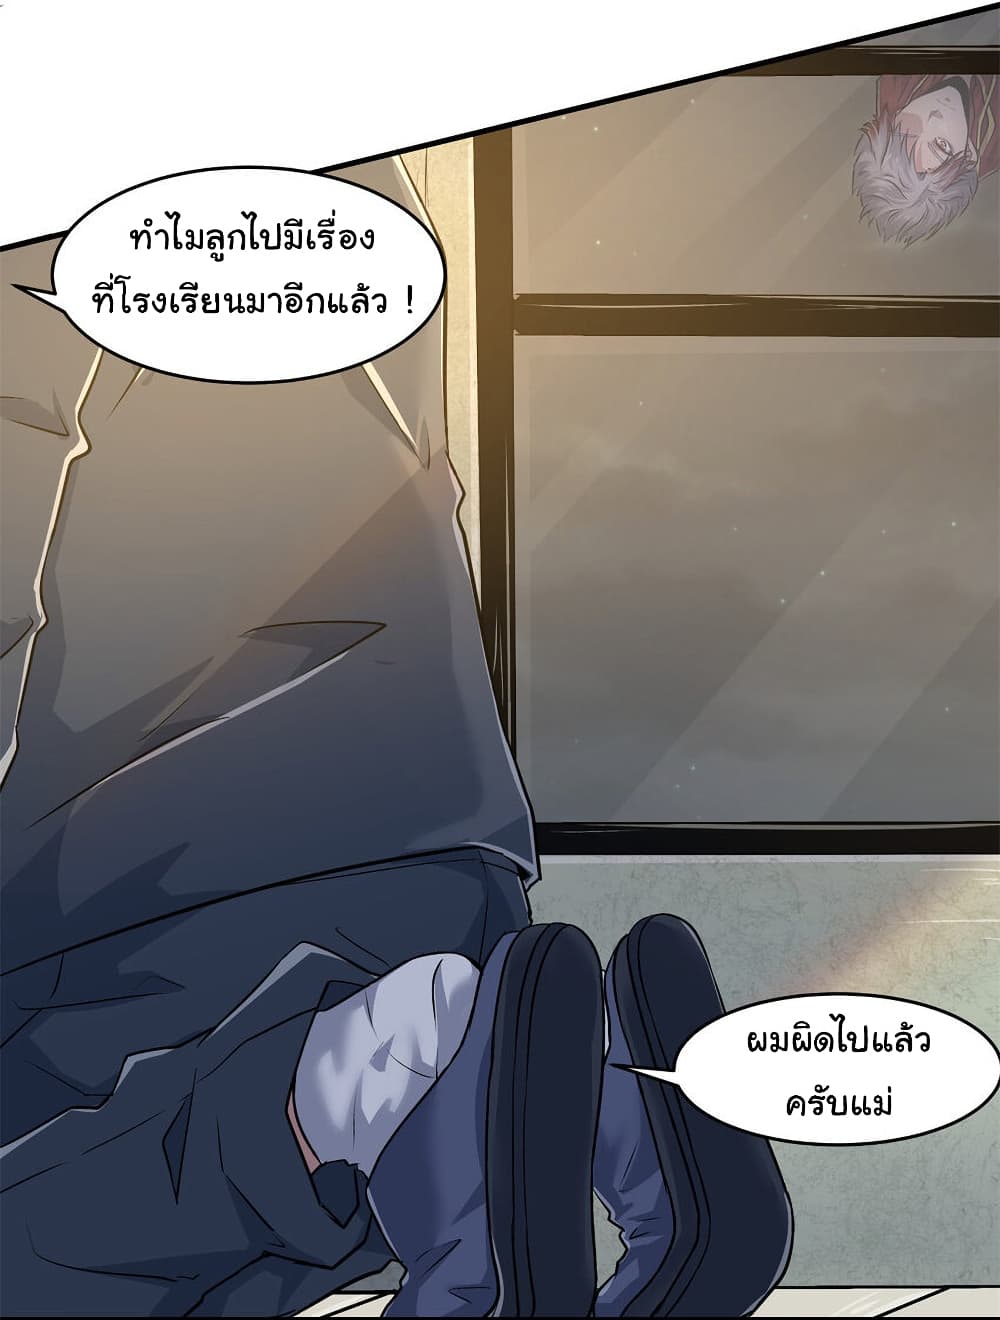 Live Steadily, Donโ€t Wave เธ•เธญเธเธ—เธตเน 9 (38)